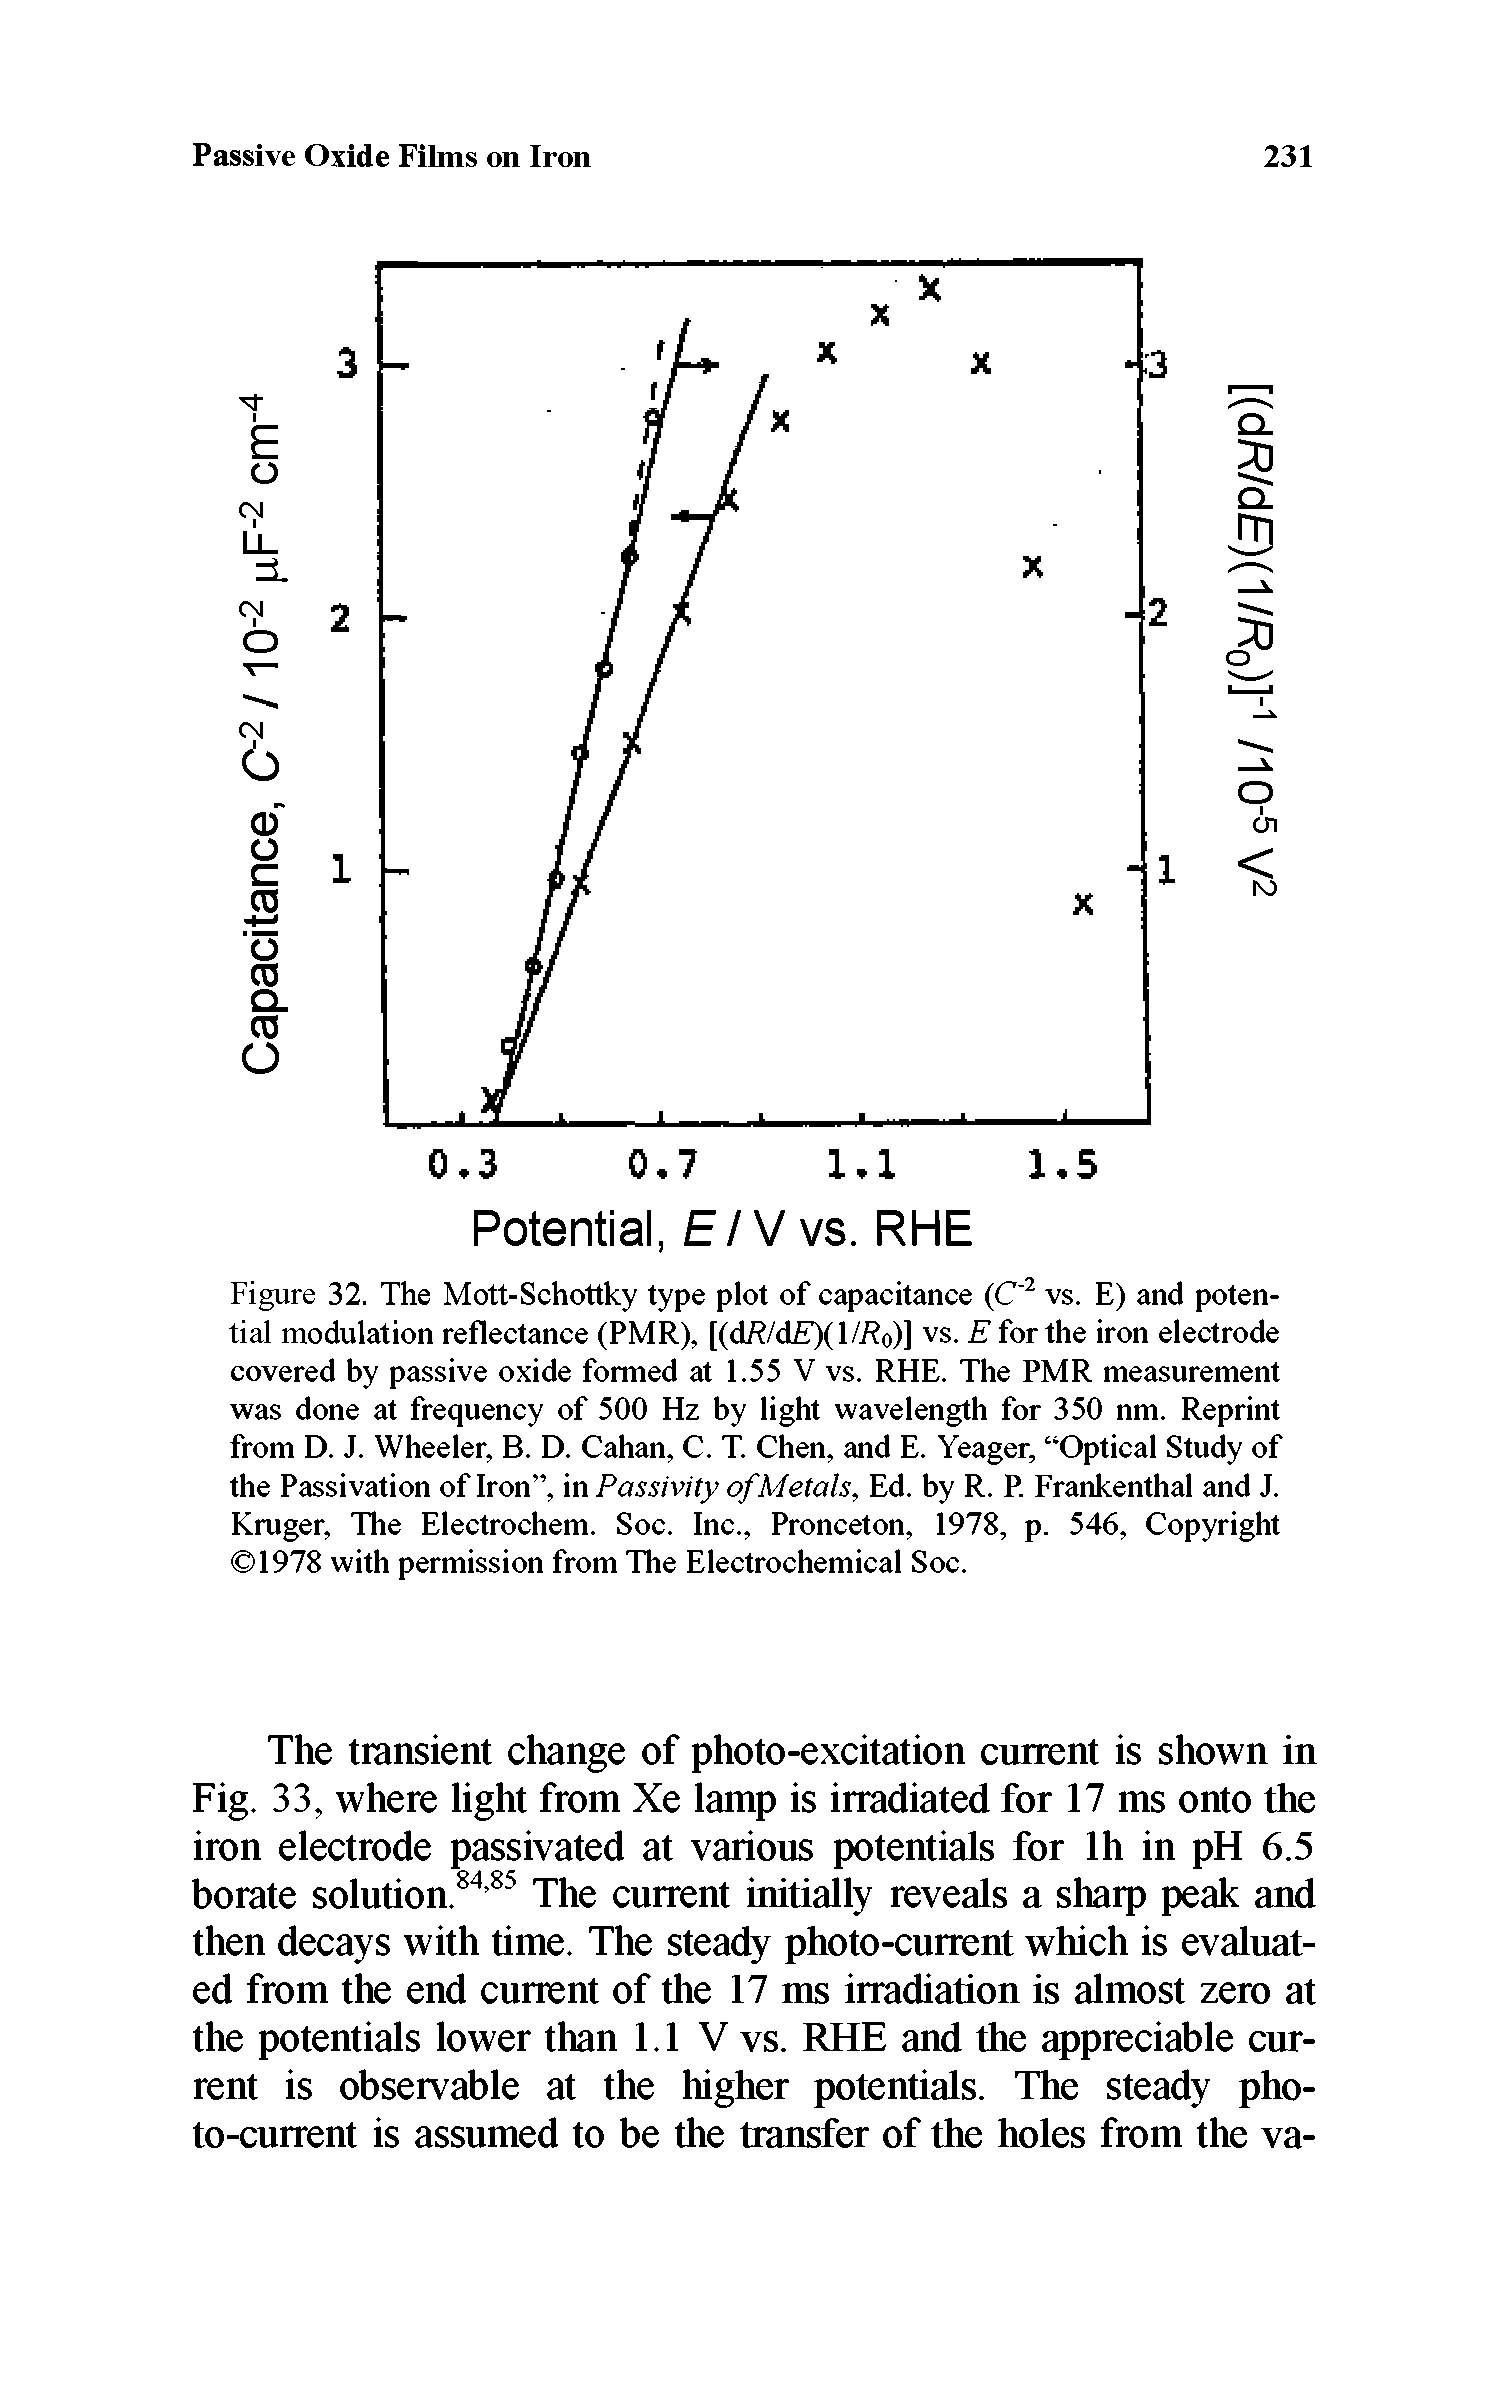 Figure 32. The Mott-Schottky type plot of capacitance (C vs. E) and potential modulation reflectance (PMR), [(d/ /d )(l/f o)] vs. E for the iron electrode covered by passive oxide formed at 1.55 V vs. RHE. The PMR measurement was done at frequency of 500 Hz by light wavelength for 350 nm. Reprint from D. J. Wheeler, B. D. Cahan, C. T. Chen, and E. Yeager, Optical Study of the Passivation of Iron , in Passivity of Metals, Ed. by R. P. Frankenthal and J. Kruger, The Electrochem. Soc. Inc., Pronceton, 1978, p. 546, Copyright 1978 with permission from The Electrochemical Soc.